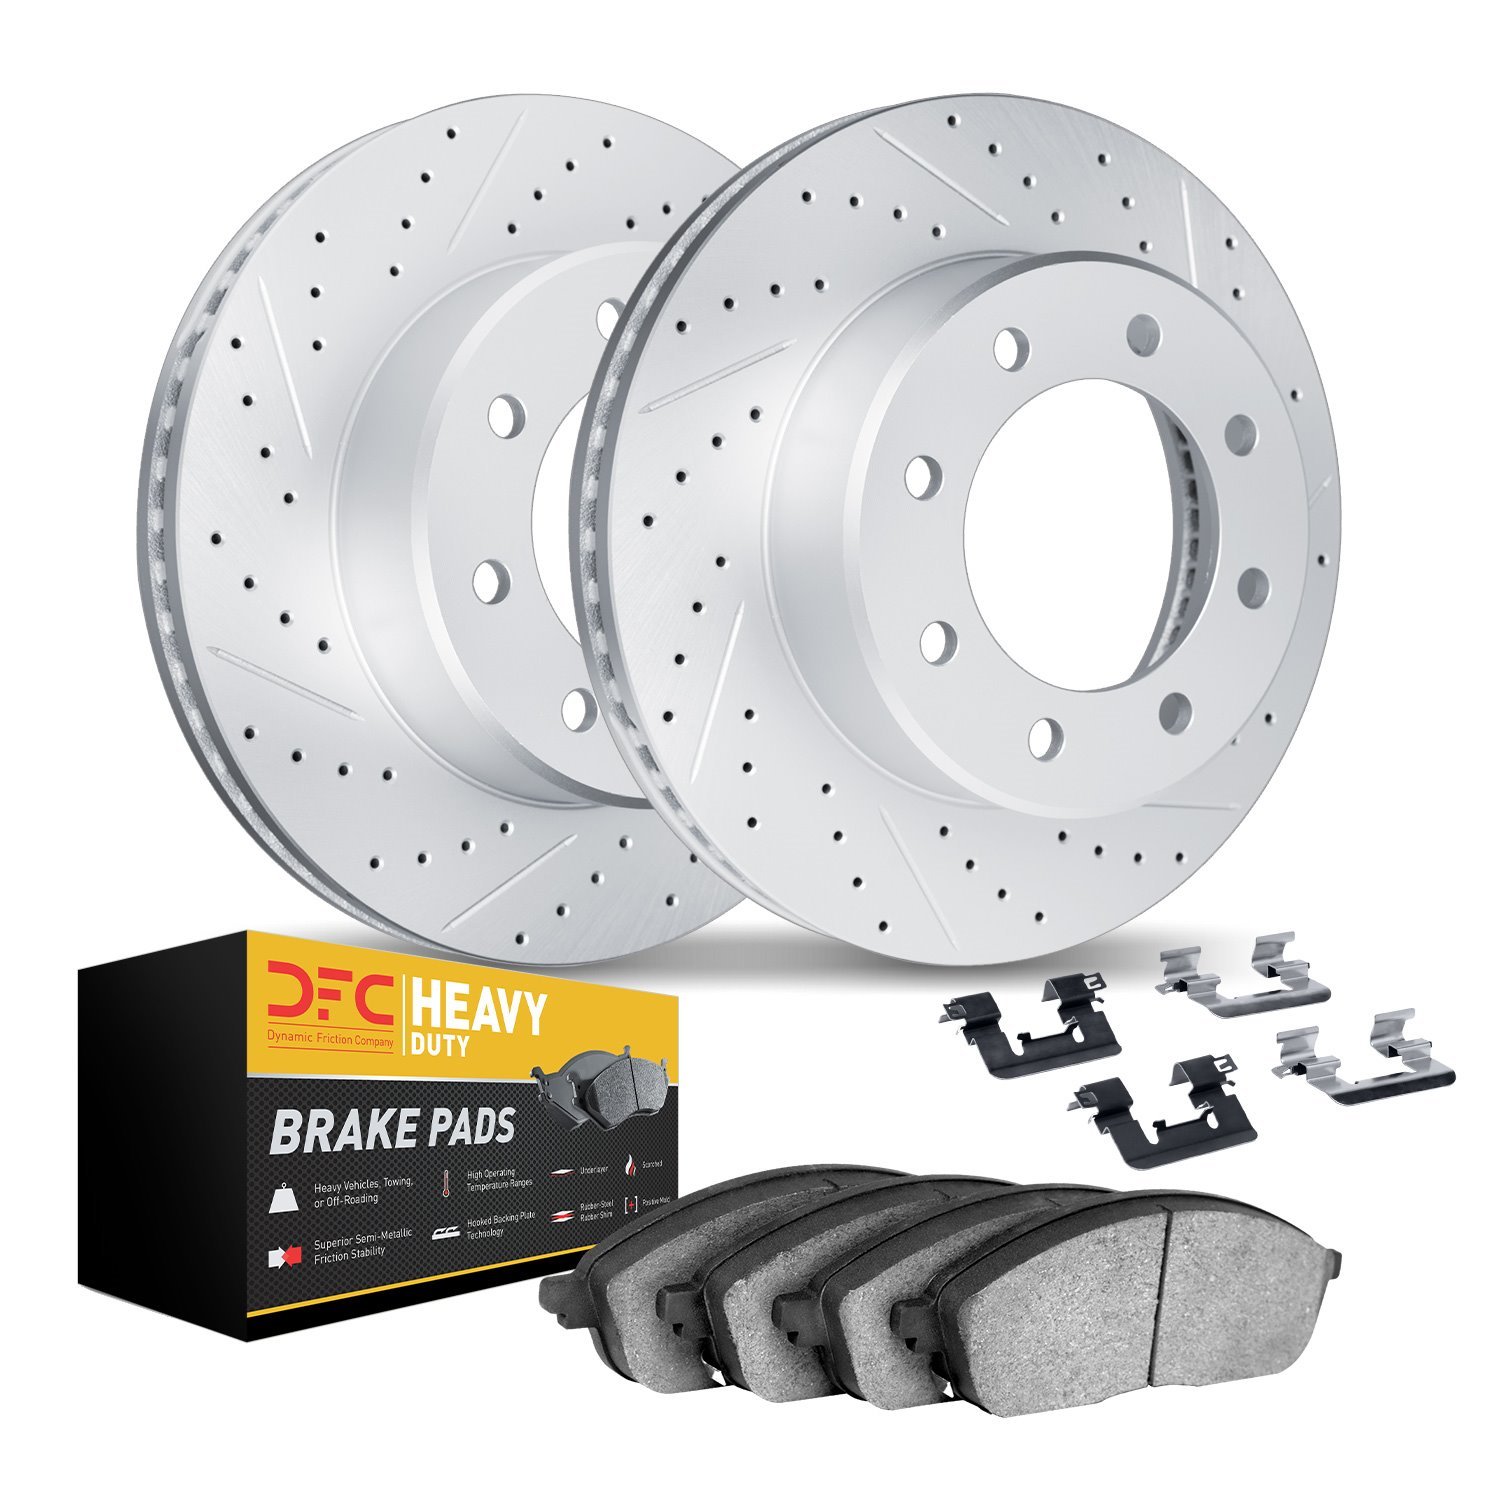 2212-99123 Geoperformance Drilled/Slotted Rotors w/Heavy-Duty Pads Kit & Hardware, 1999-2005 Ford/Lincoln/Mercury/Mazda, Positio